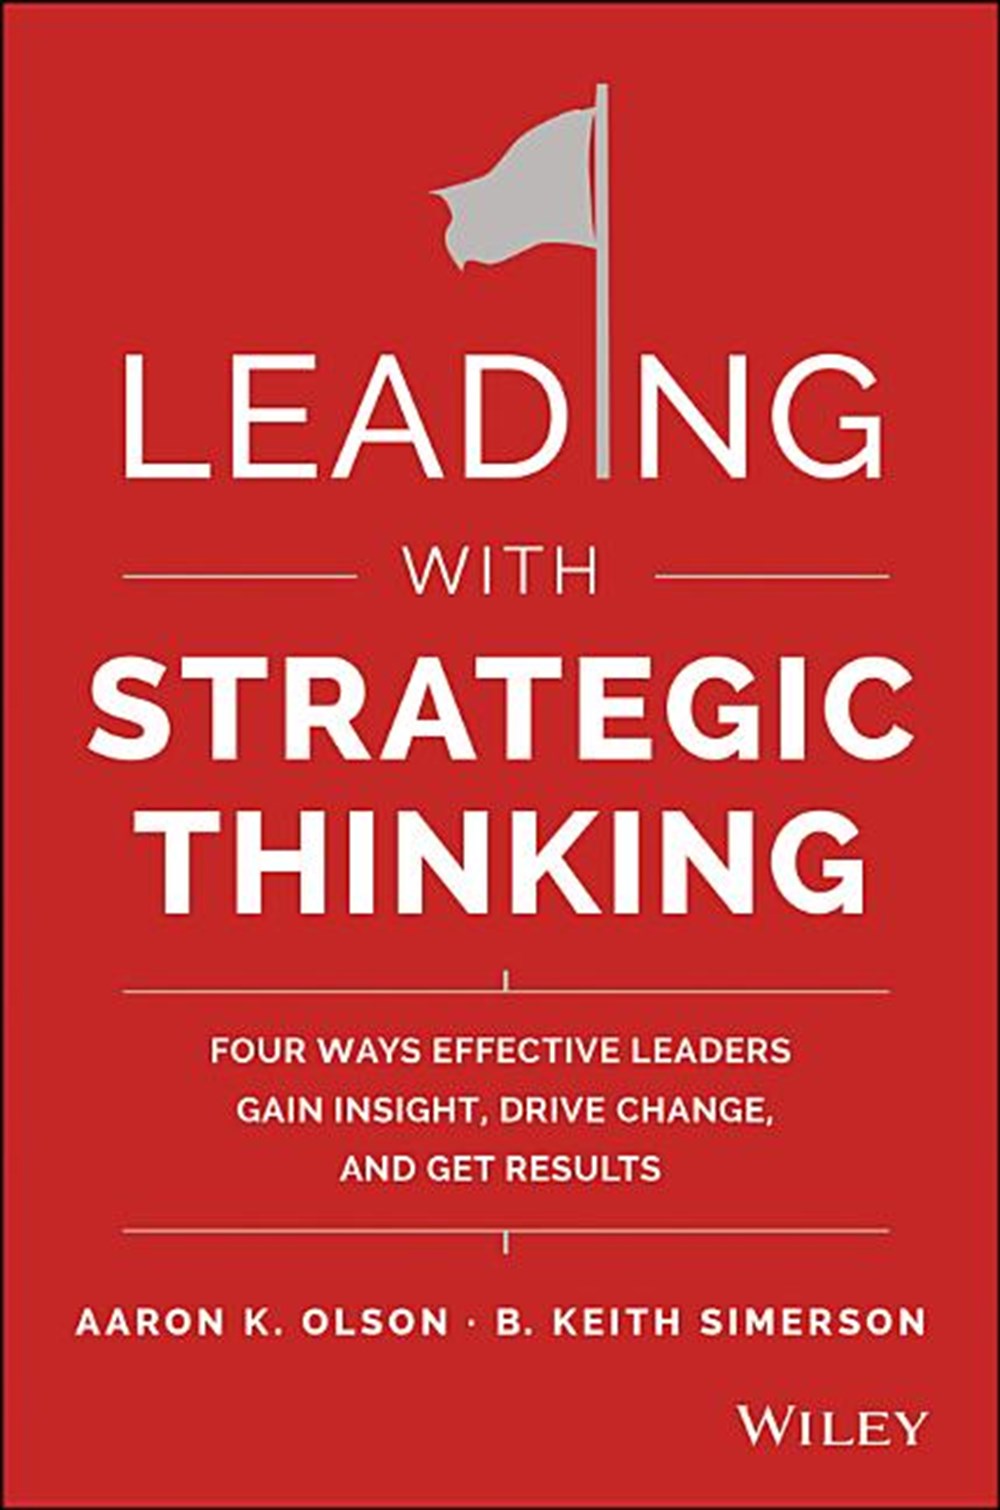 Leading with Strategic Thinking: Four Ways Effective Leaders Gain Insight, Drive Change, and Get Res